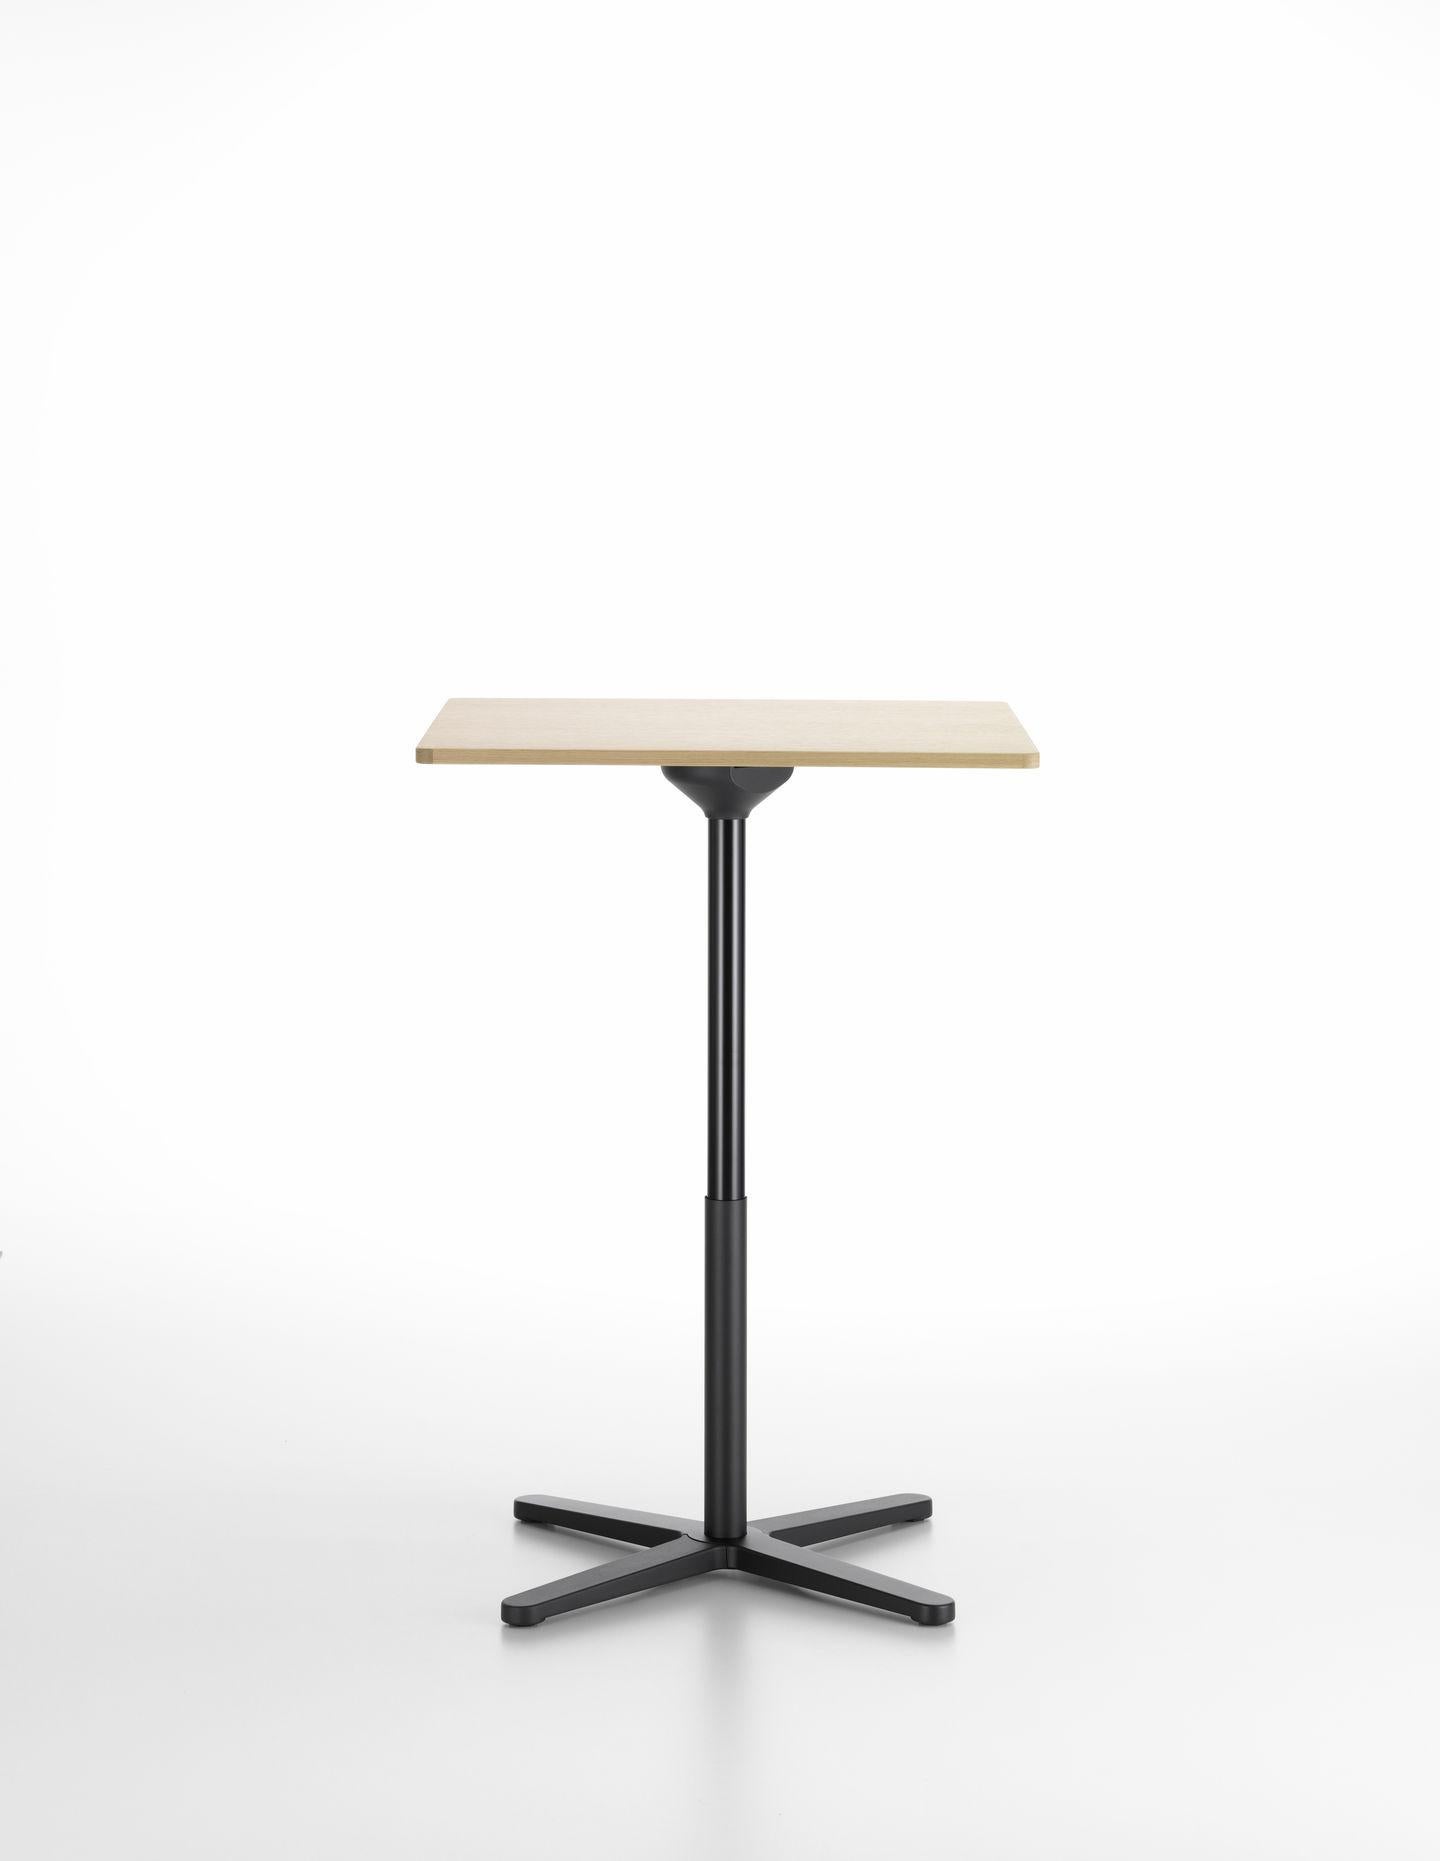 Fold table designed by Jasper Morrison in 2015.
Manufactured by Vitra, Switzerland.

Thanks to a sophisticated mechanism, the Super Fold Table by Jasper Morrison folds up completely with a single movement of the hand. The legs of the four-star